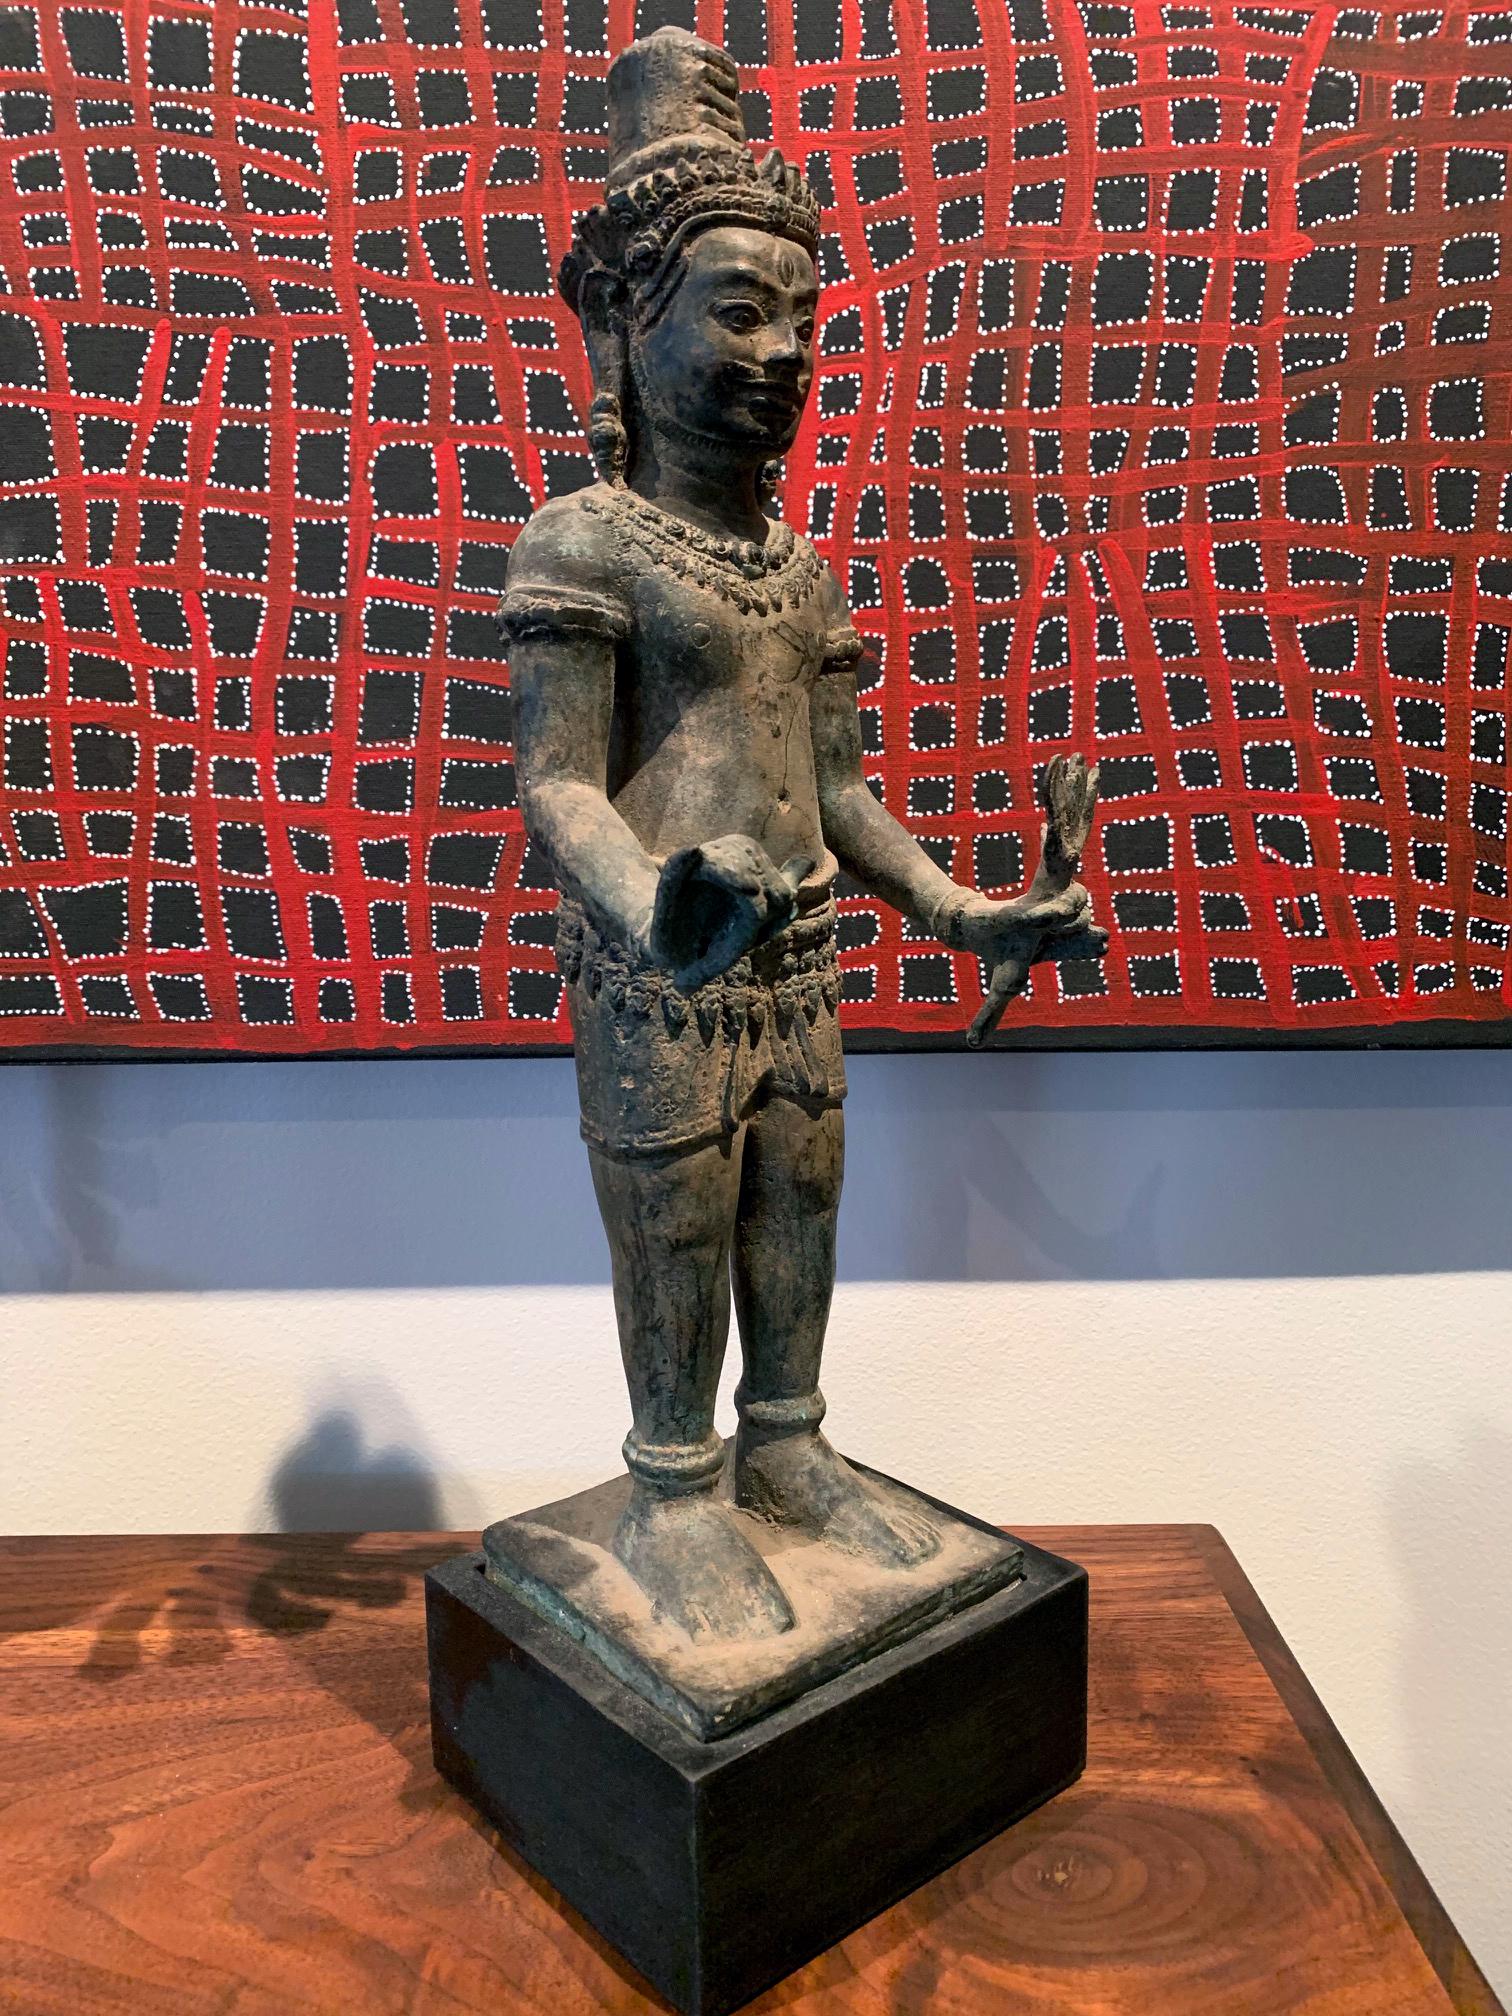 Khmer art of Cambodia was heavily influenced by Hinduism before it was infused with Theravada Buddhism in 13th-14th century. This bronze sculpture depicts male deity Vishnu, the Hindu God of Preserver. The image was cast only with two arms instead